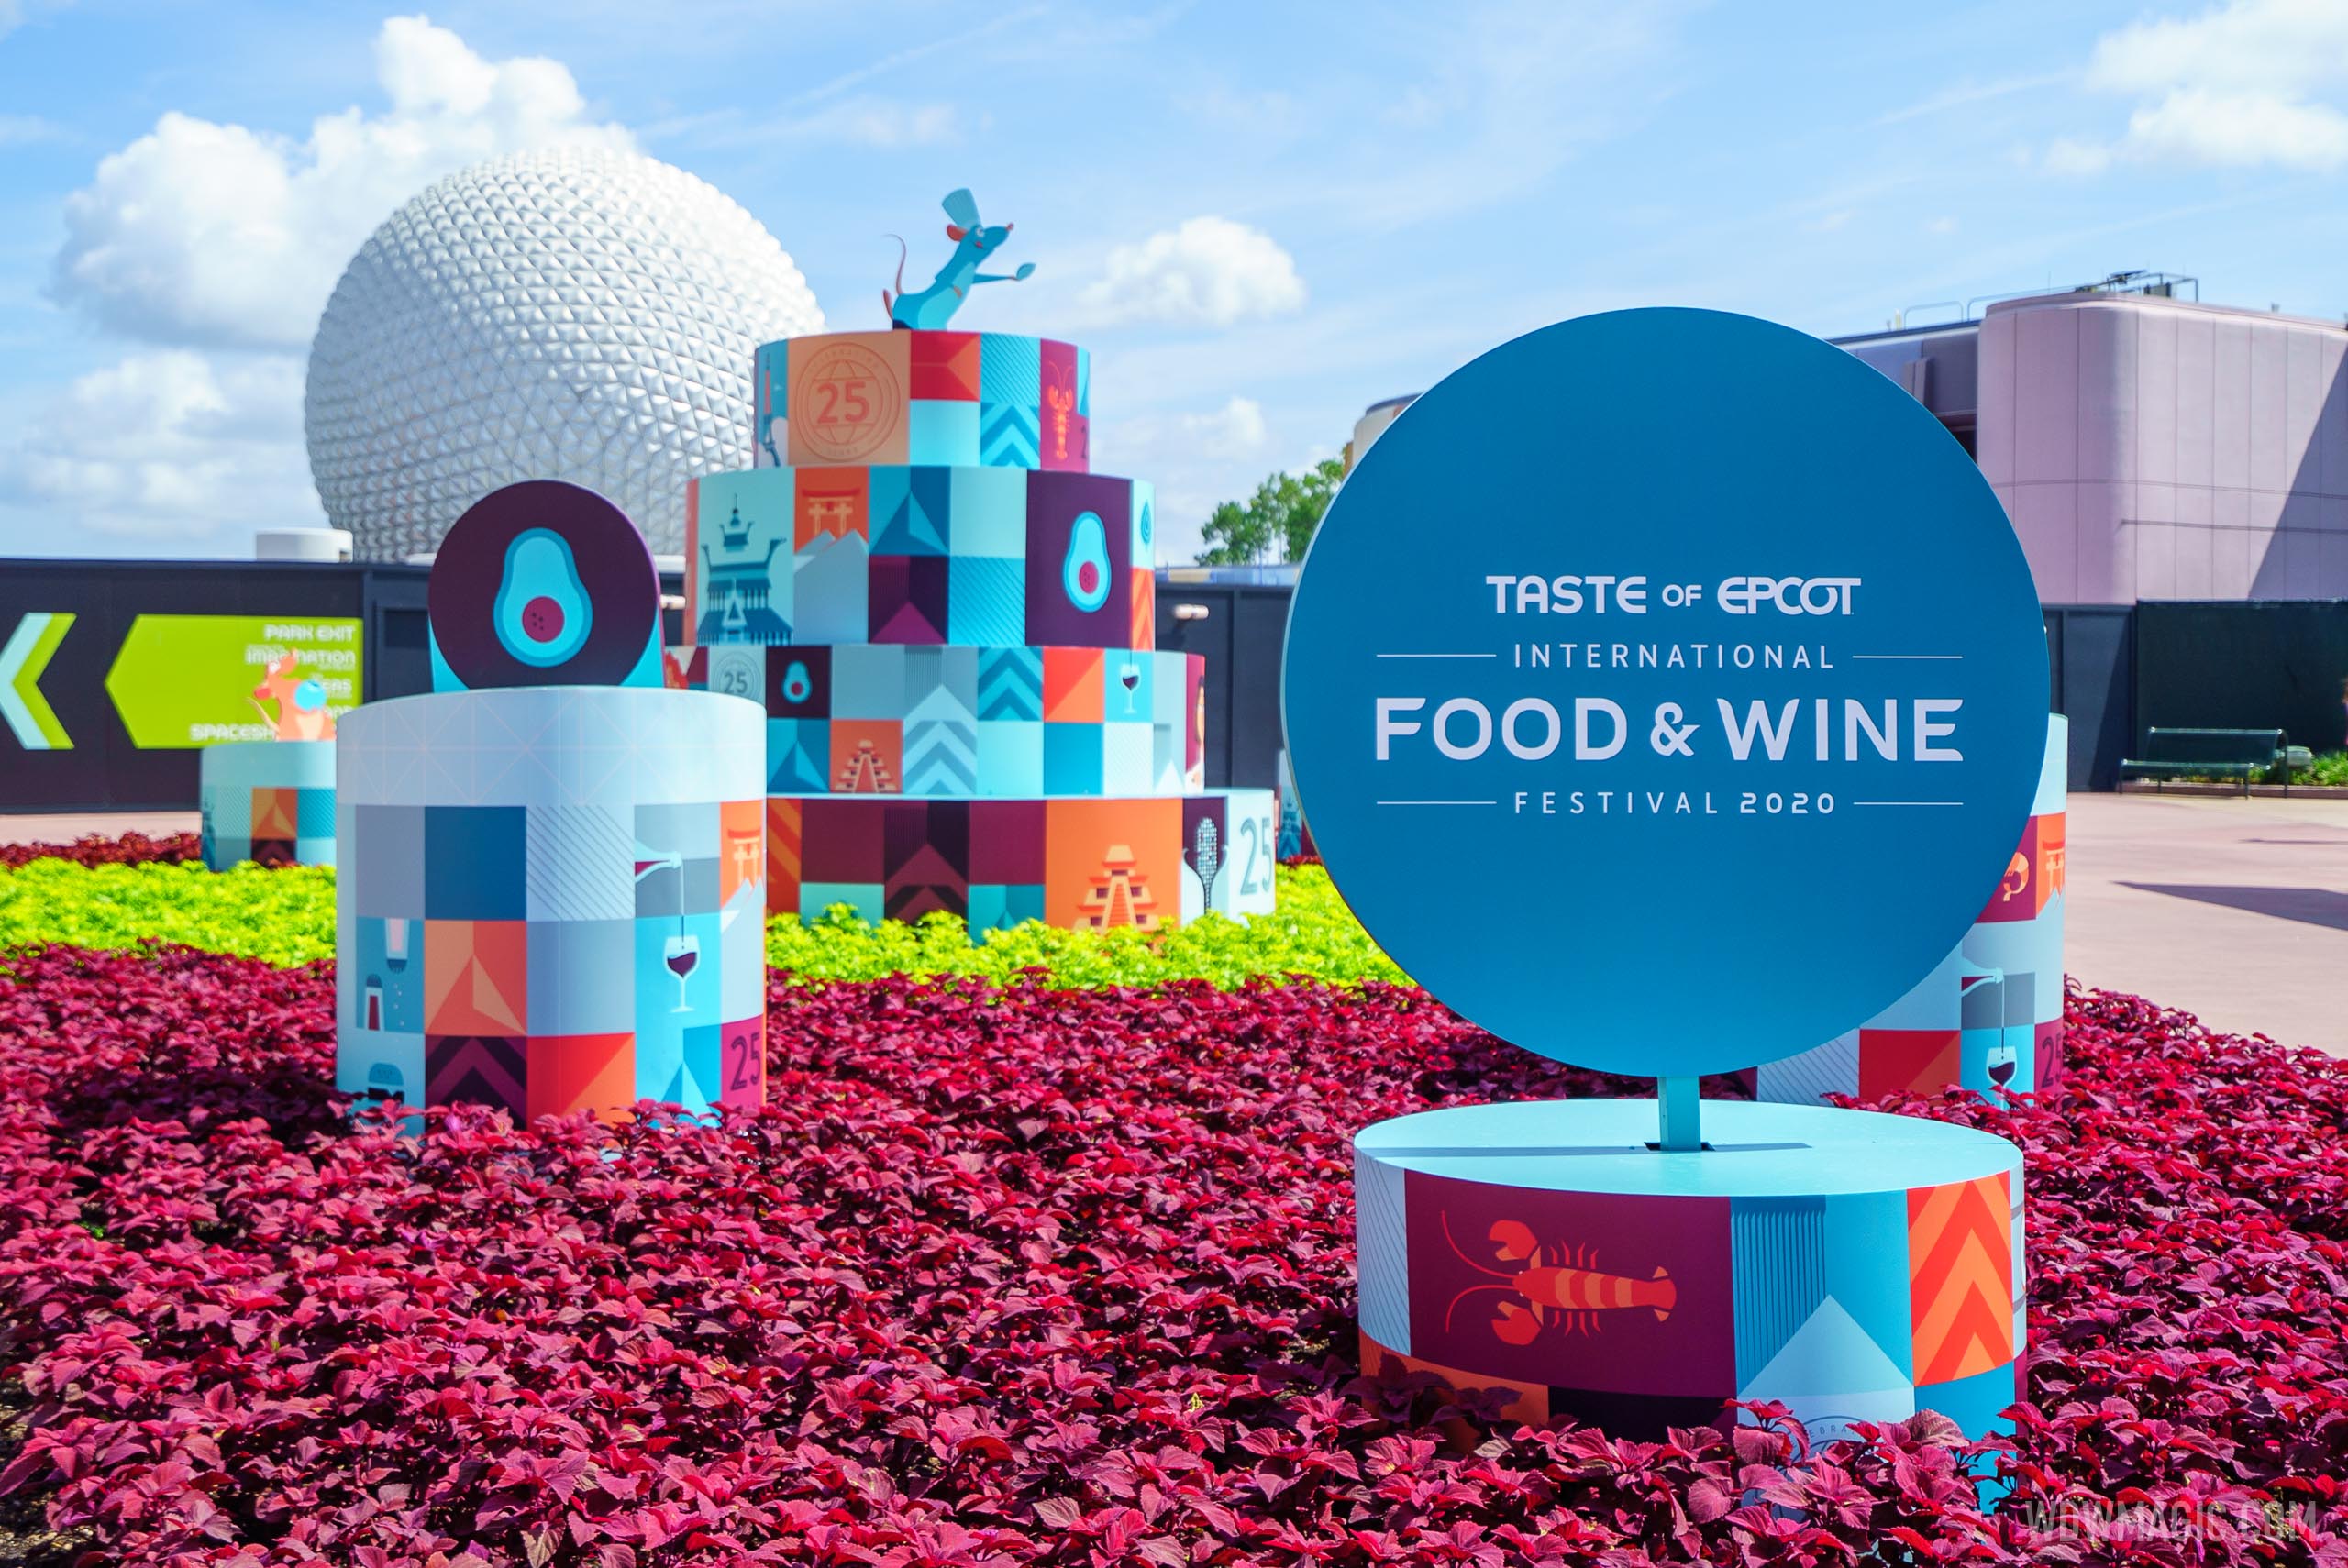 PHOTOS - A look around the 2020 Taste of EPCOT International Food and